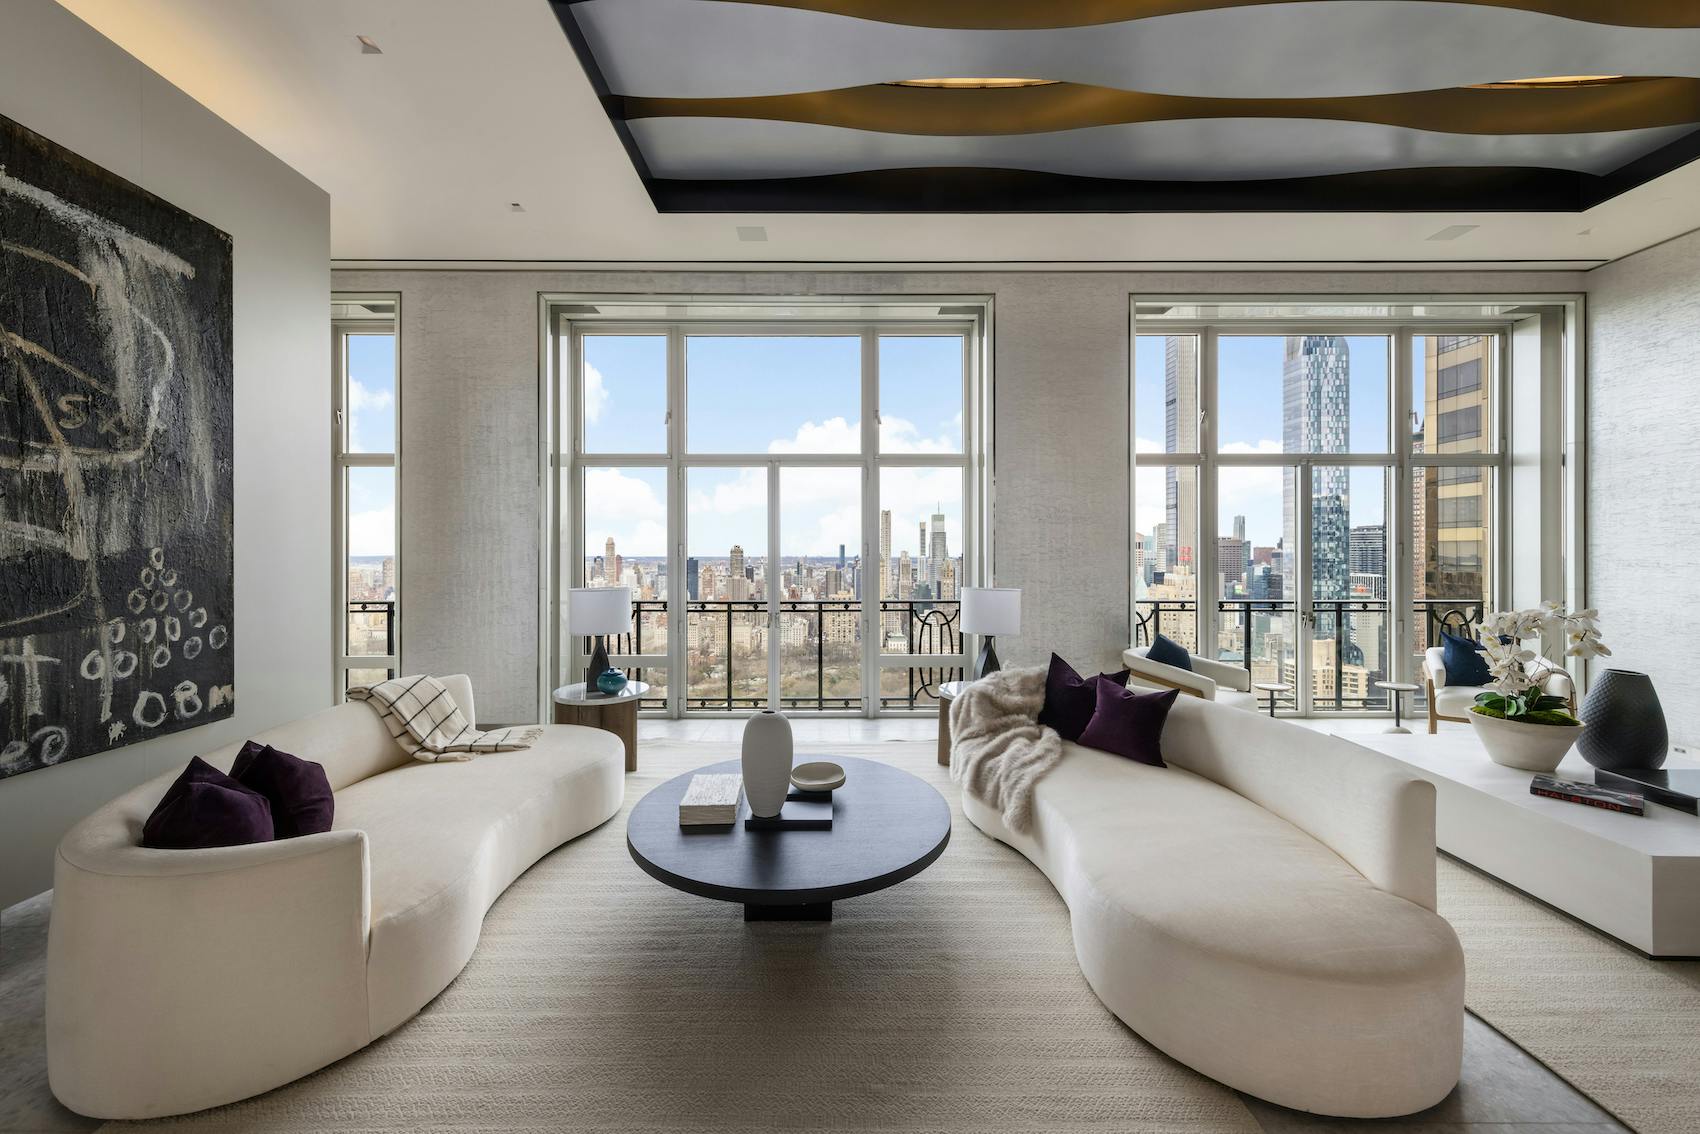 Meridith-Baer-Home-Home-Staging-New-York-Lincoln-Square-Penthouse-Highrise-Condos-and-Lofts-Transitional-Living-Room